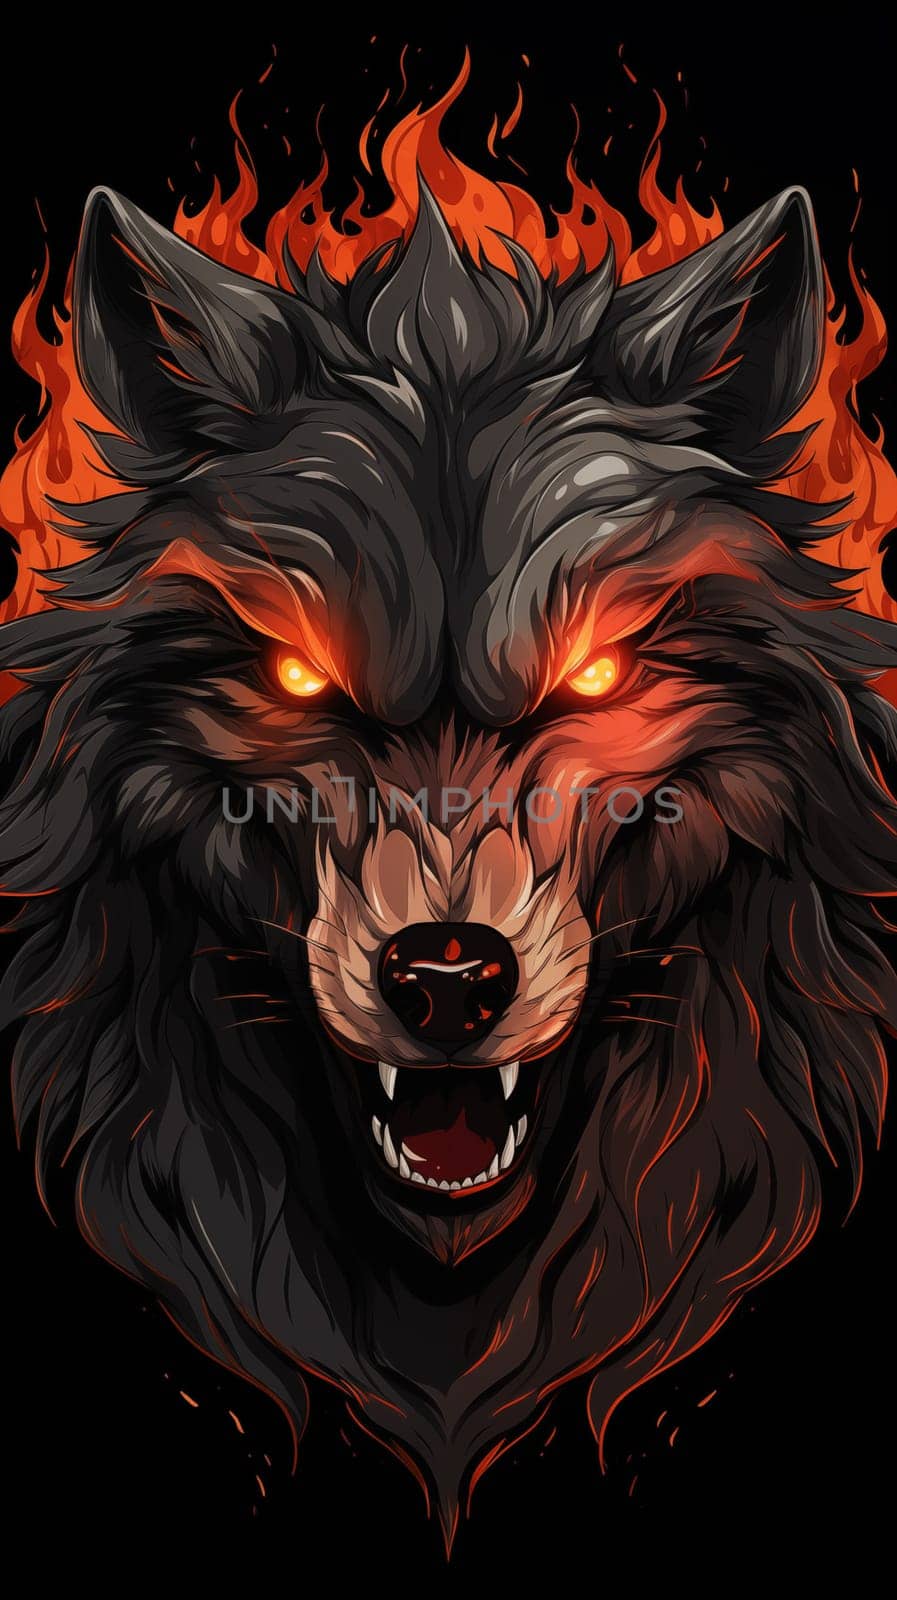 Head of an evil burning wolf, with open mouth, and burning eyes, front view. Vertical